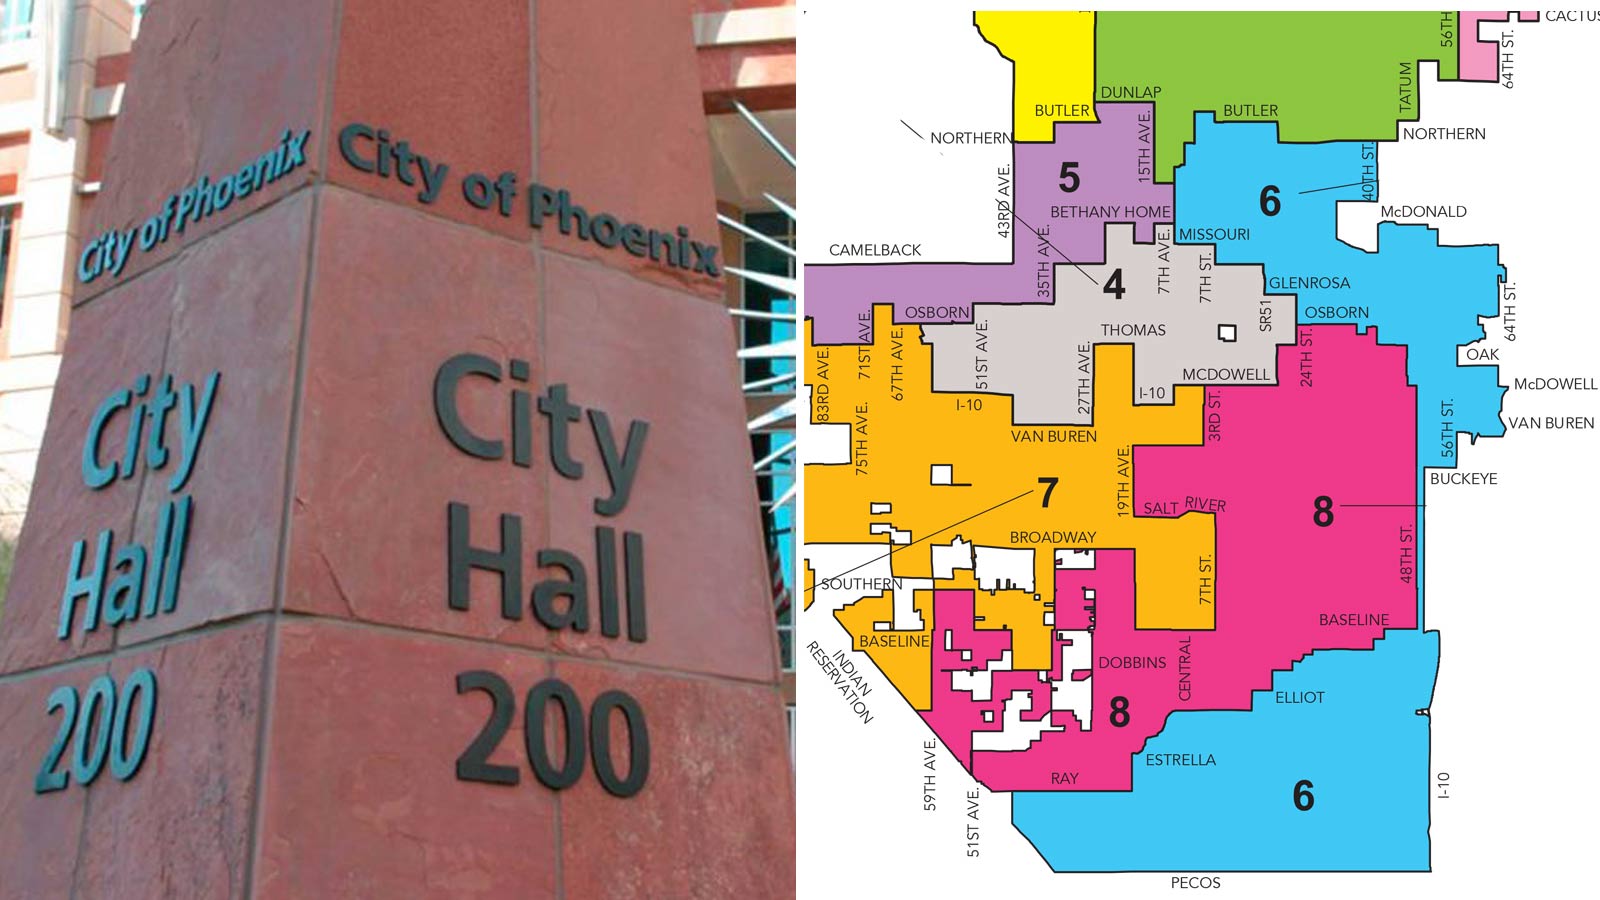 (City of Phoenix Photo and Map)...